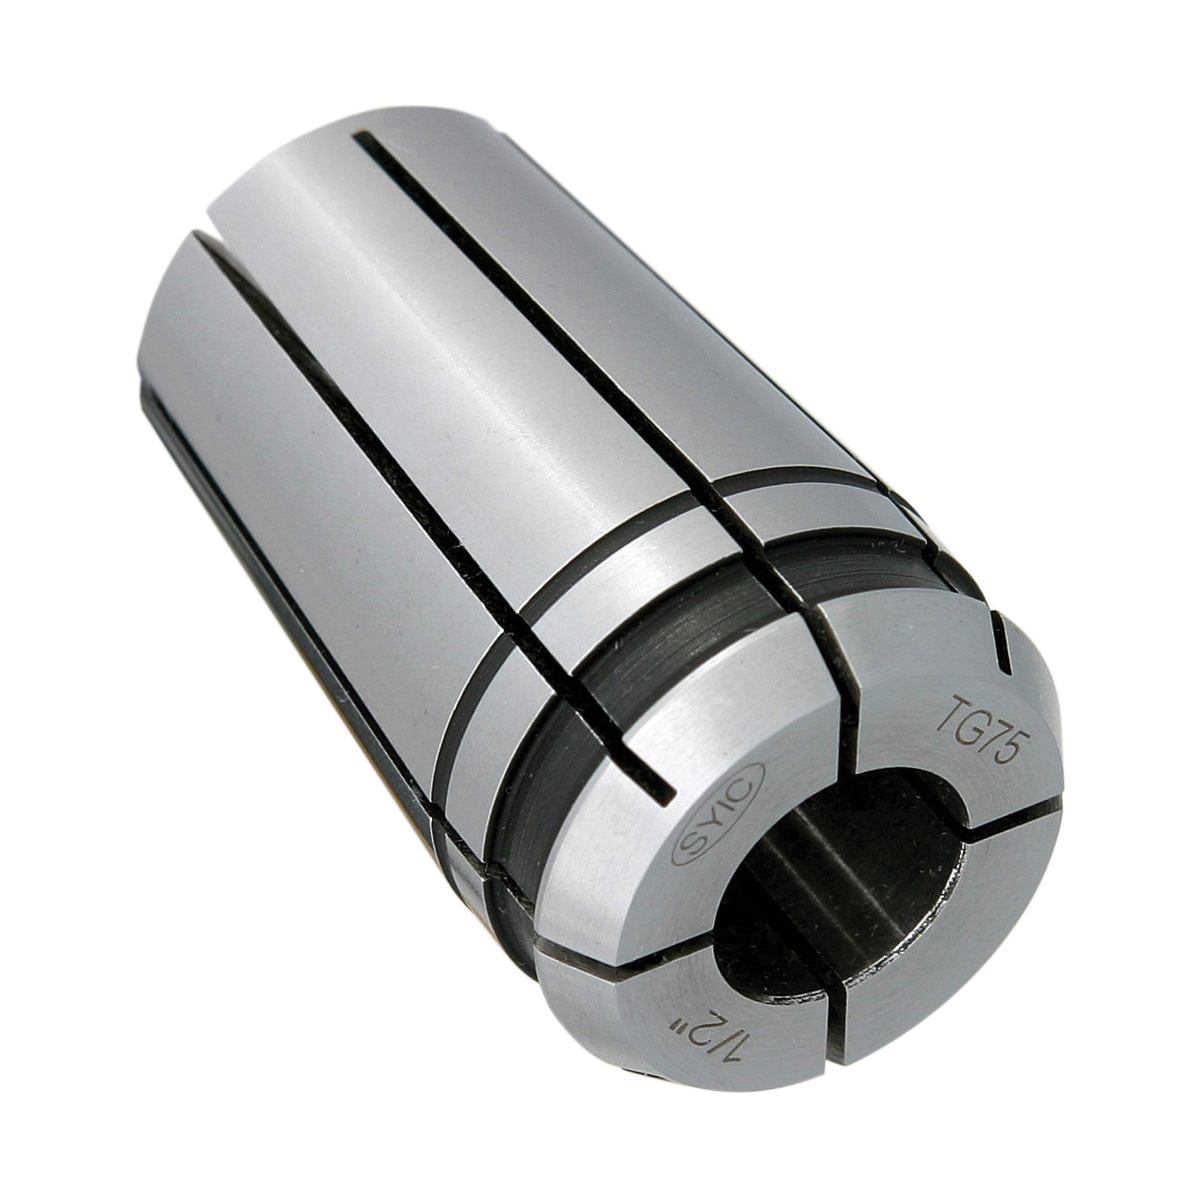 TG75 9/64" COLLET